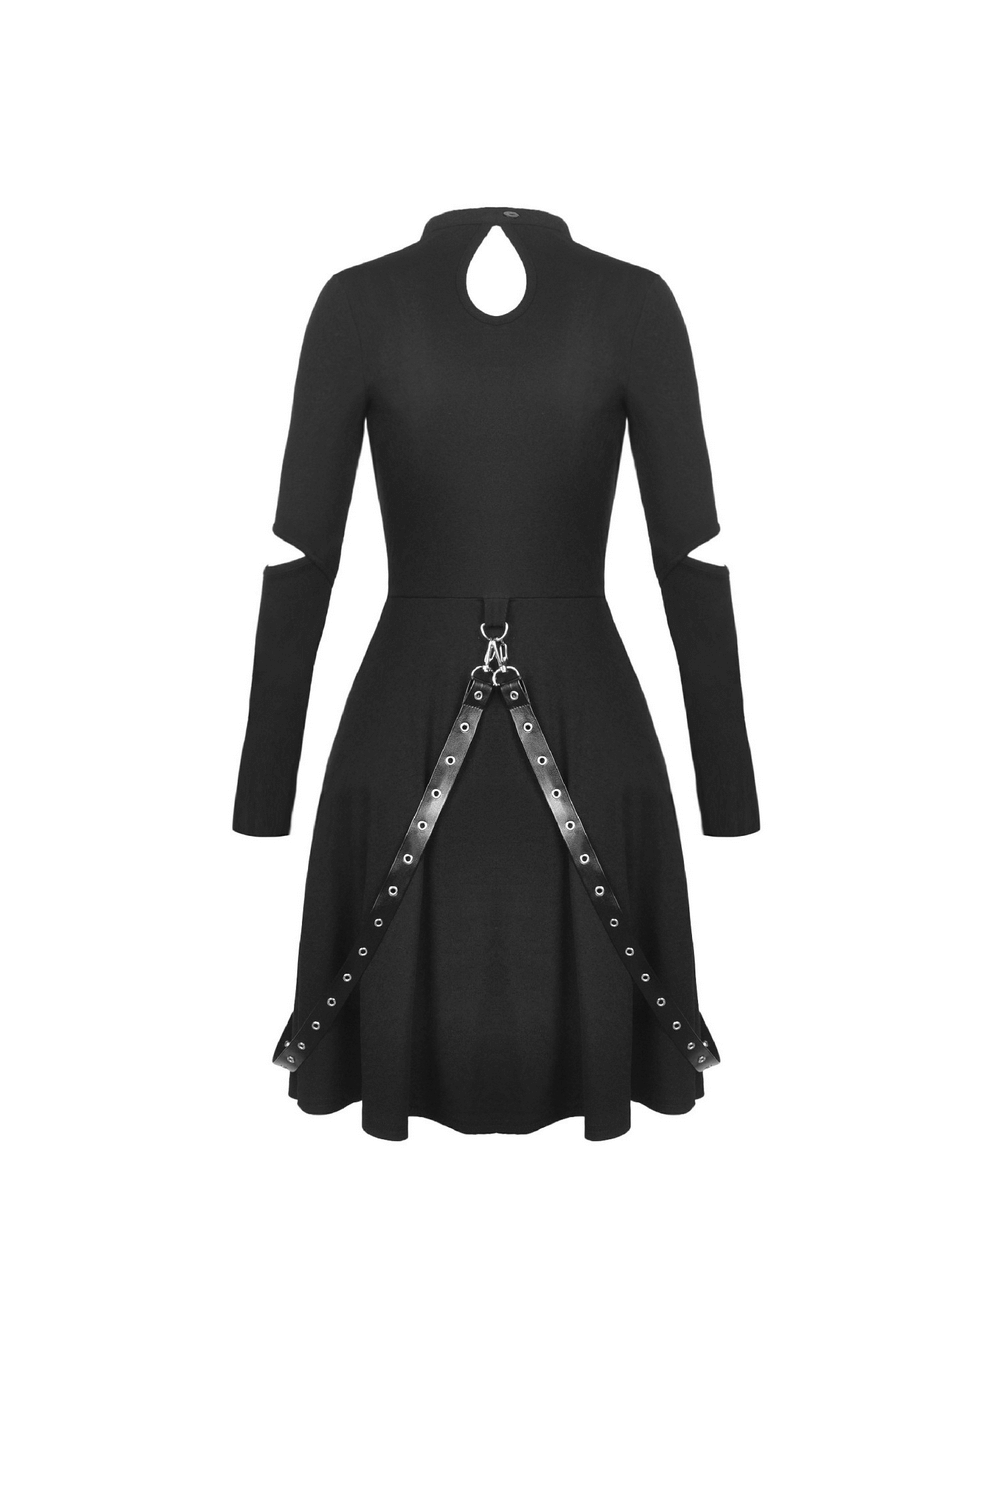 Gothic Black Dress with Faux Leather Corset Detail